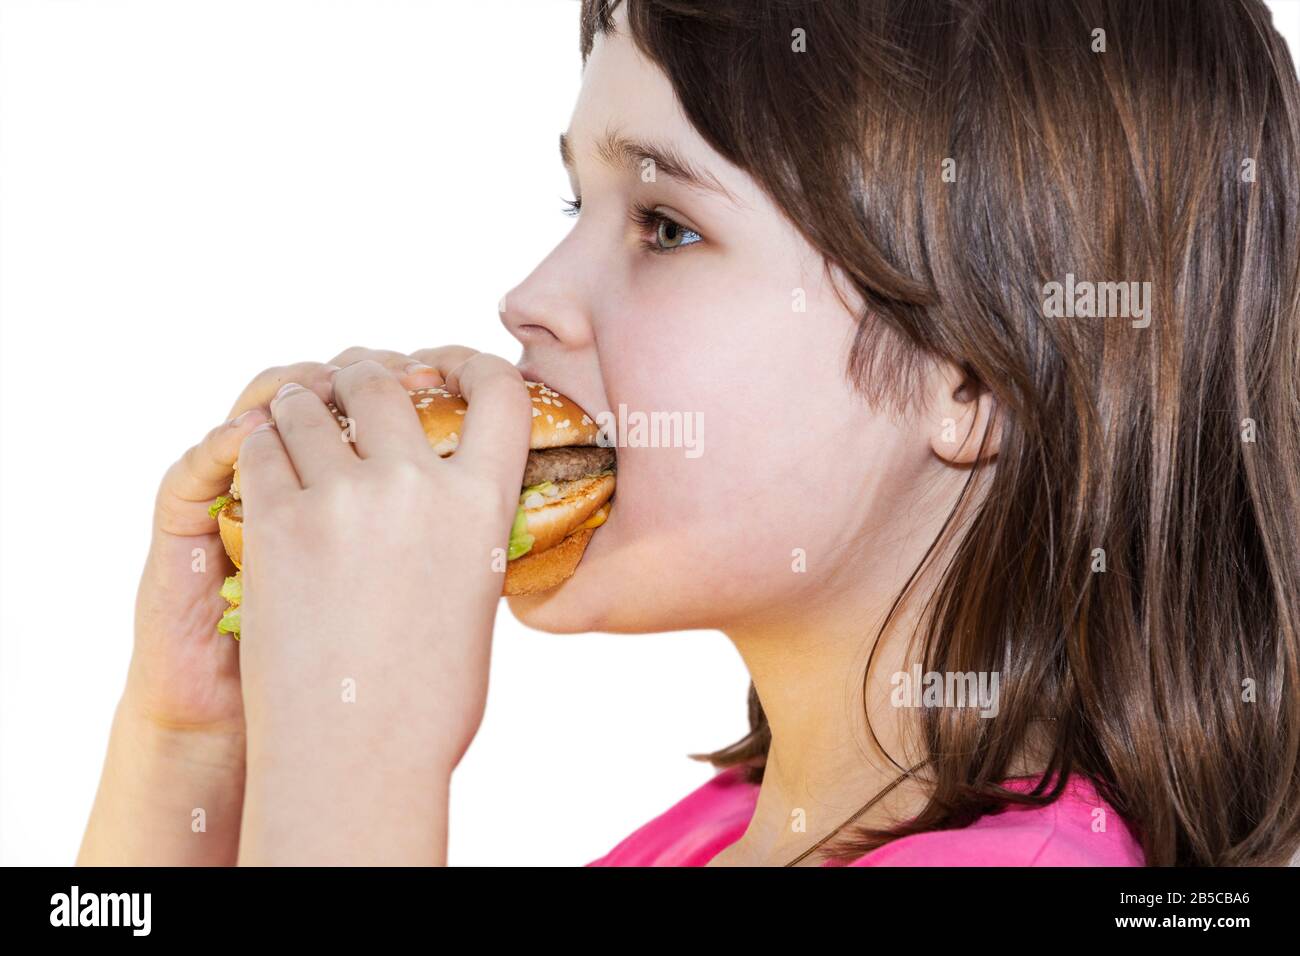 portrait of a beautiful girl, teenager and schoolgirl, holding a hamburger on a white background. Stock Photo